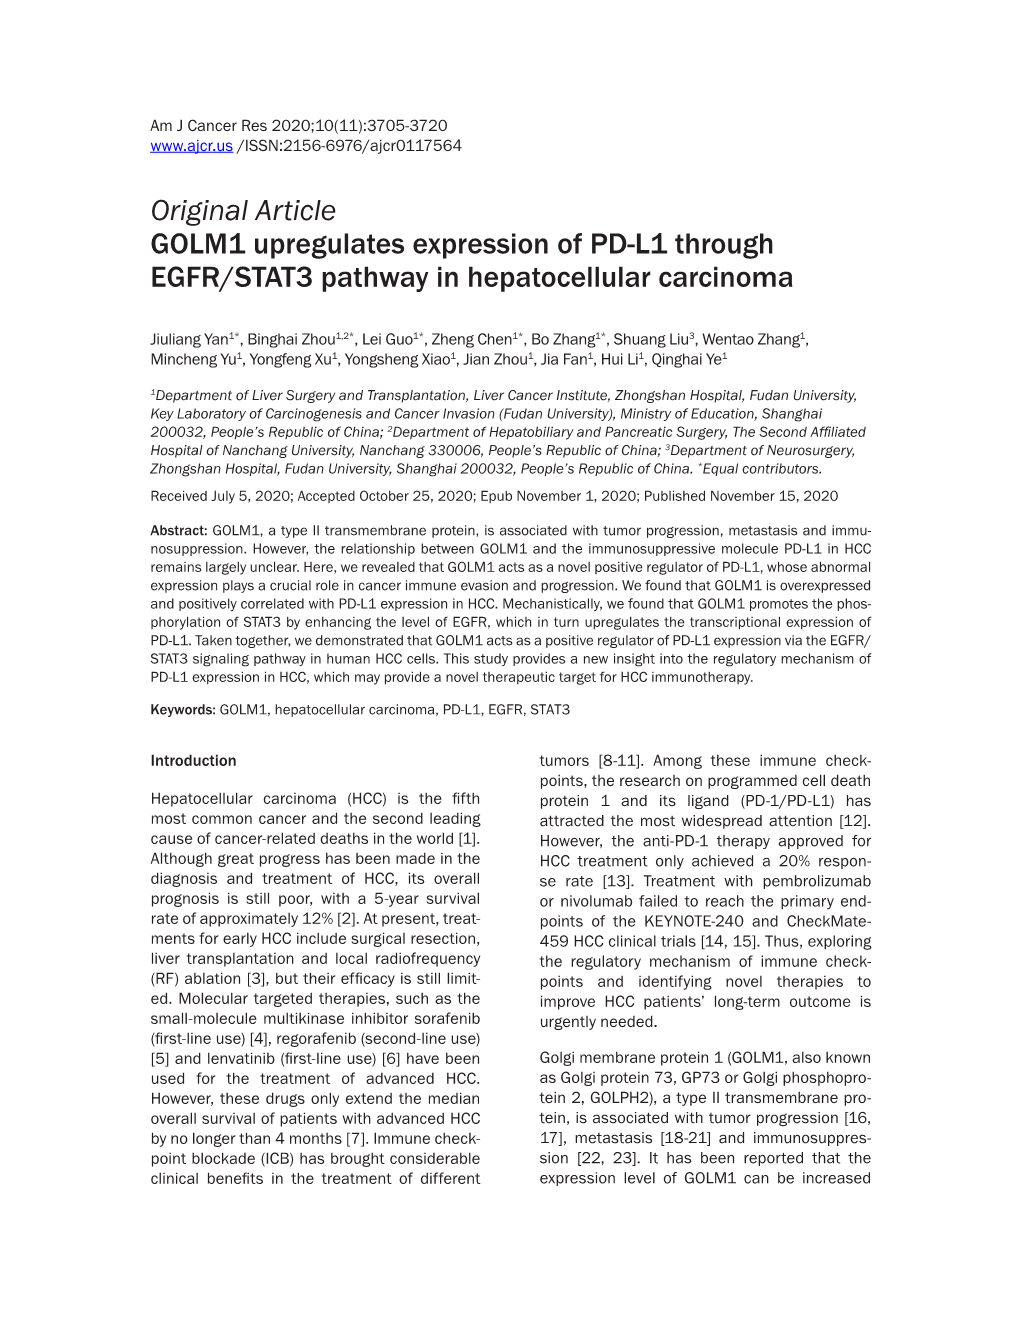 Original Article GOLM1 Upregulates Expression of PD-L1 Through EGFR/STAT3 Pathway in Hepatocellular Carcinoma